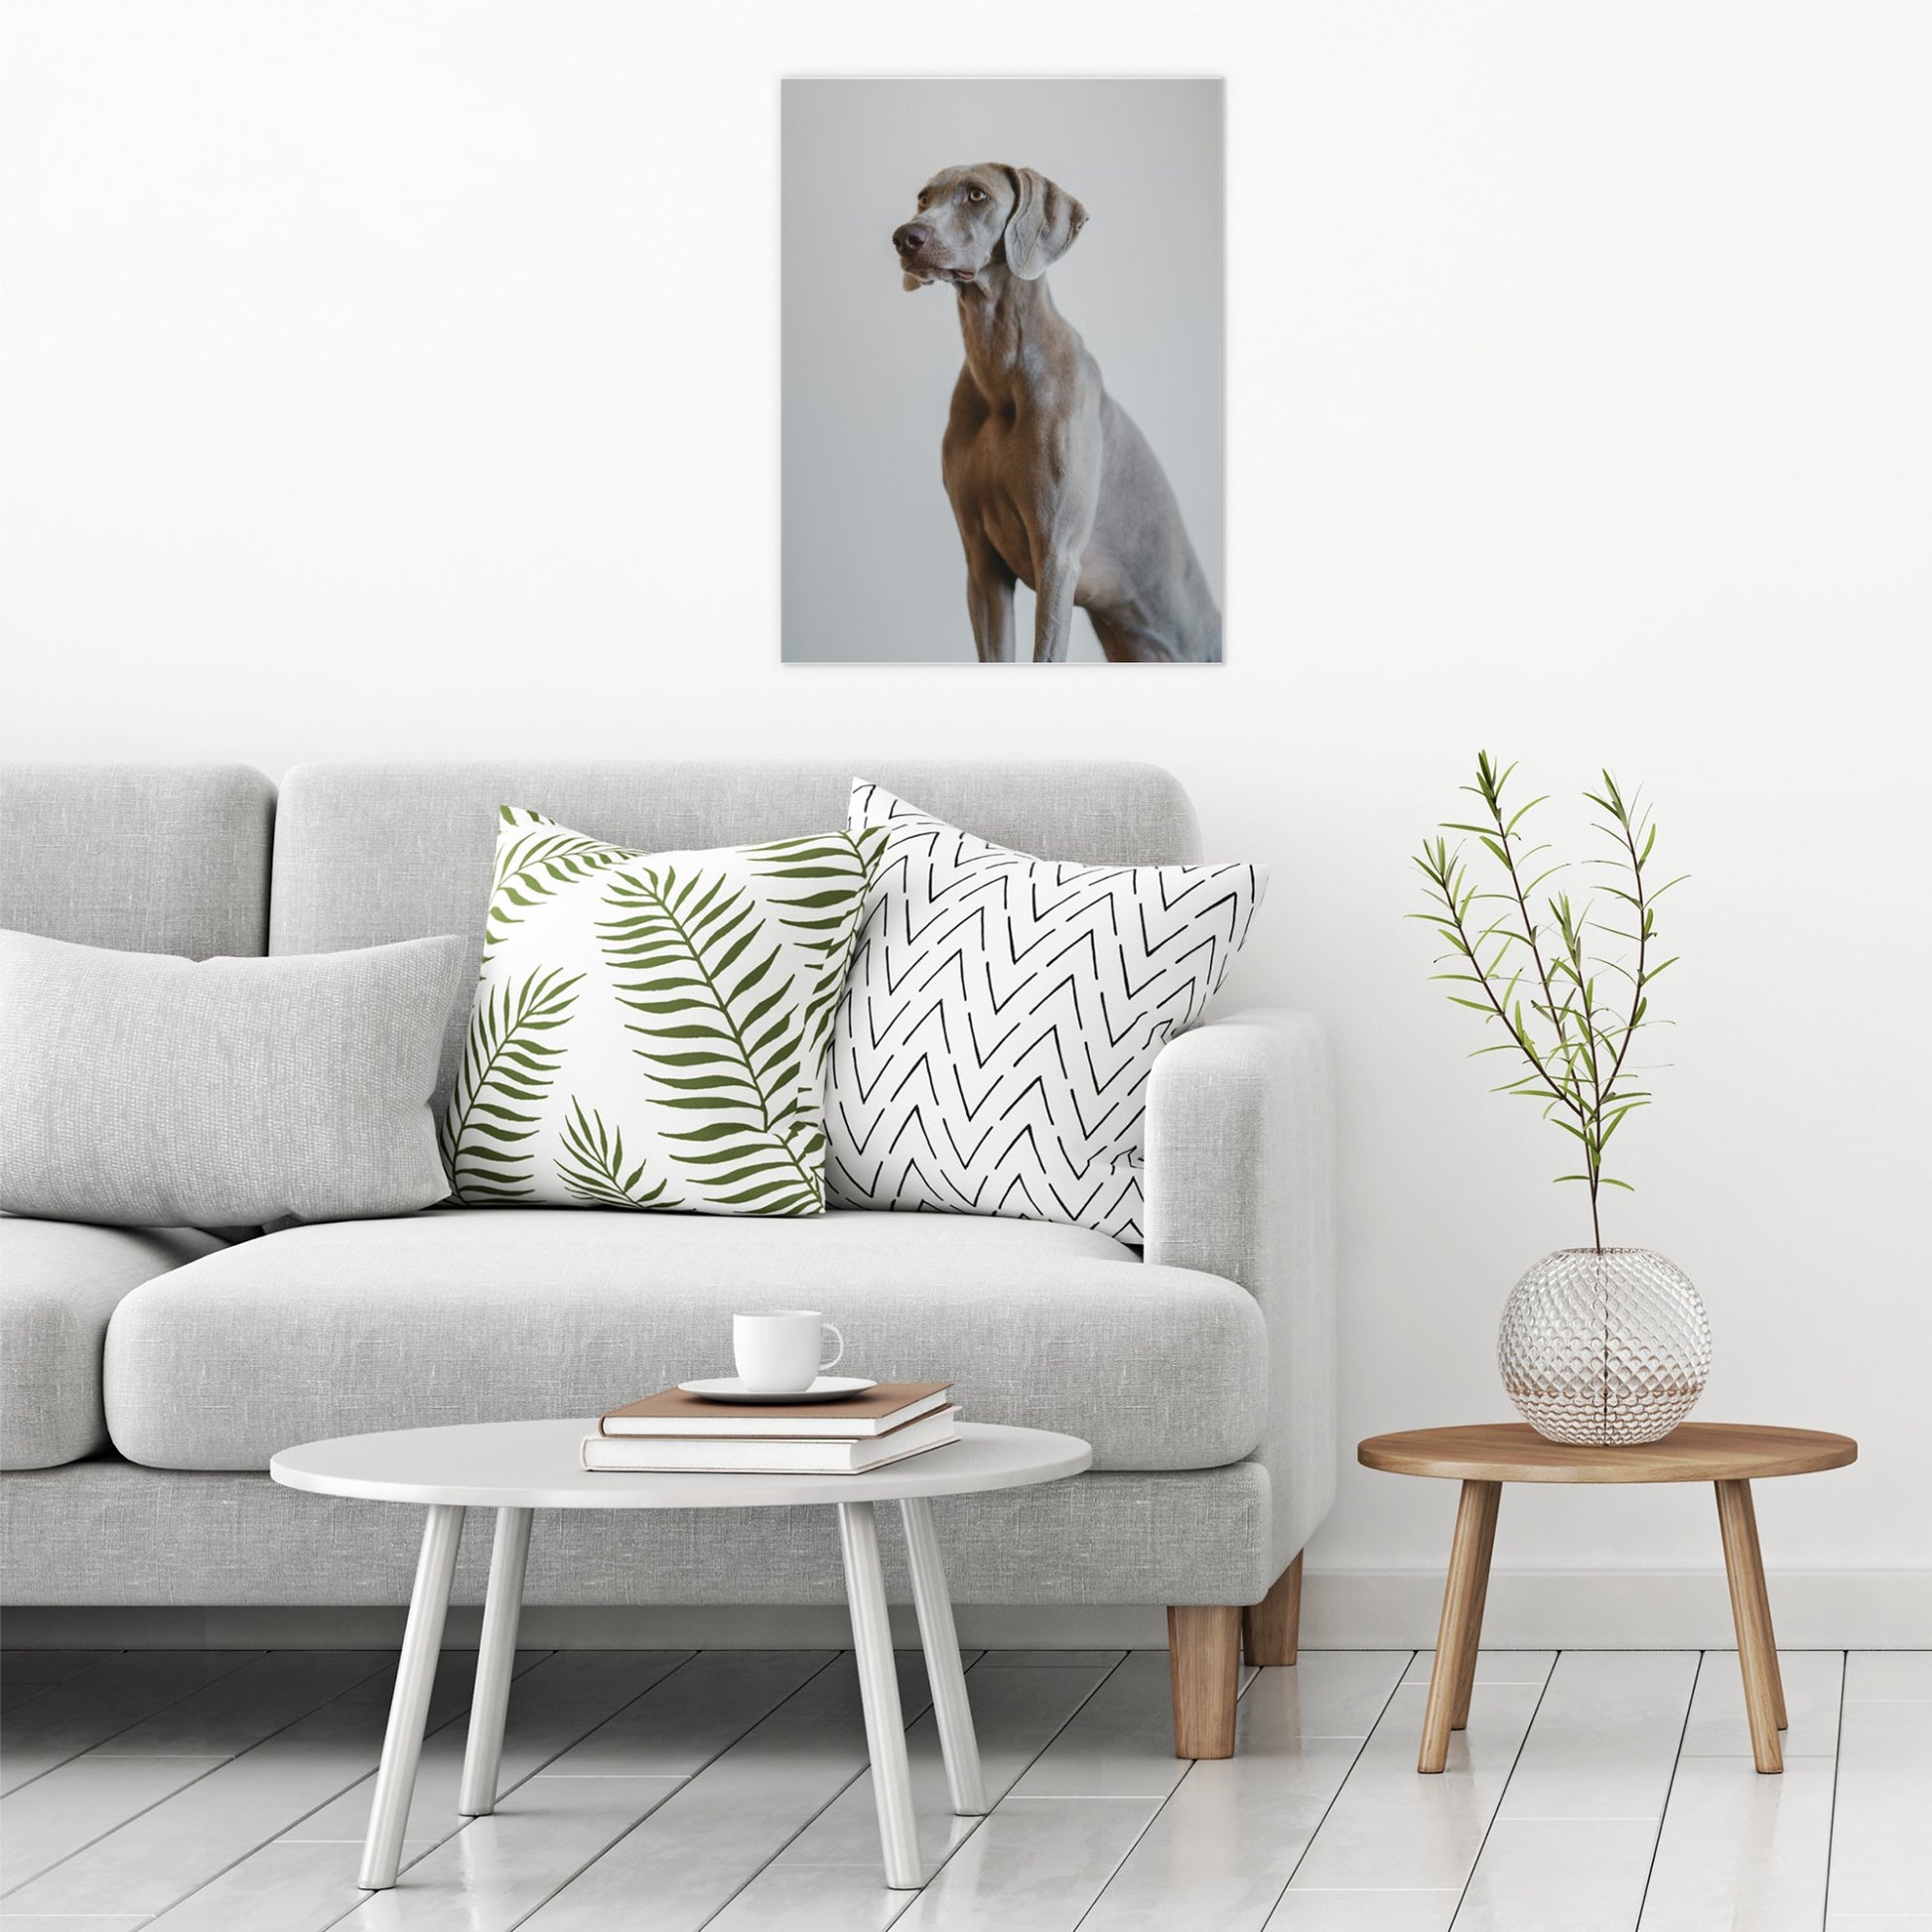 A contemporary modern room view showing a large size metal art poster display plate with printed design of a Weimaraner